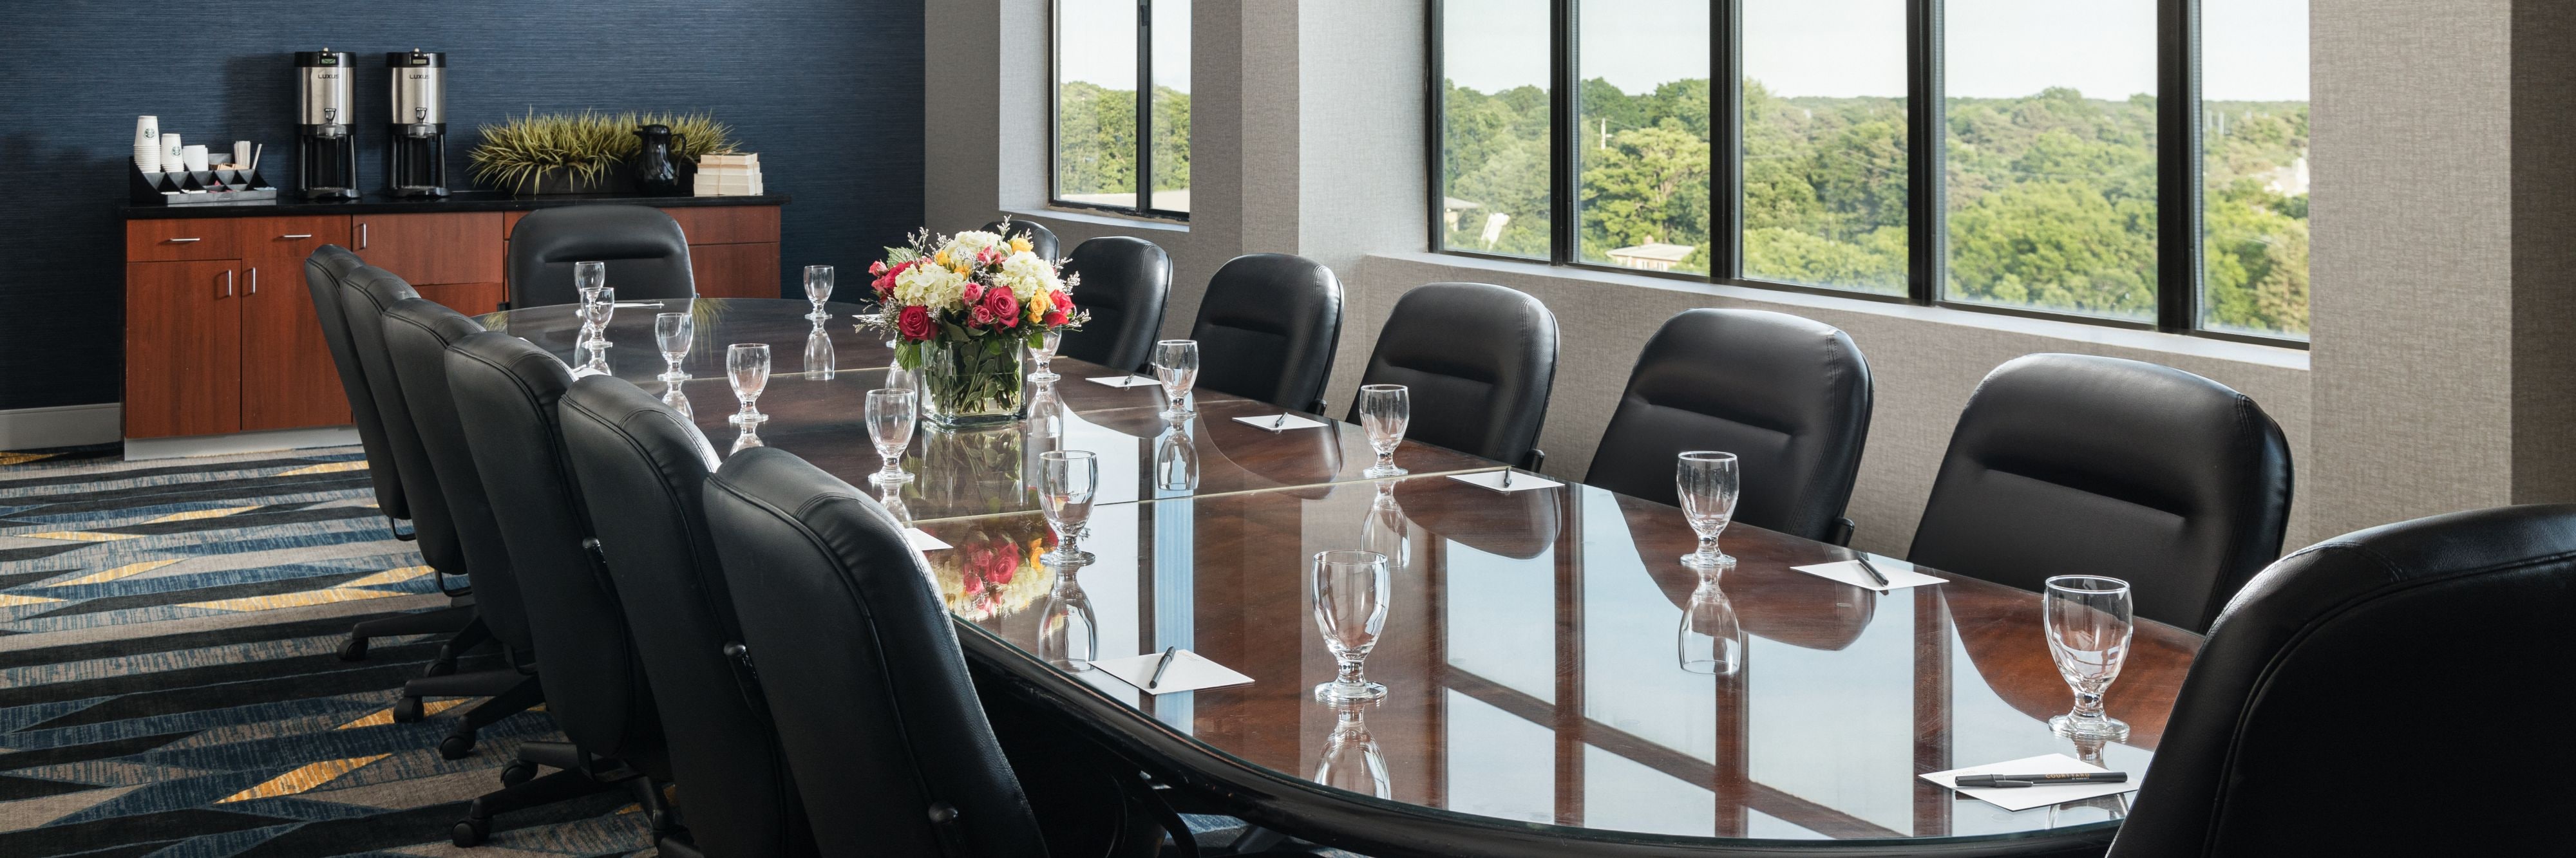 Boardroom table and windows 